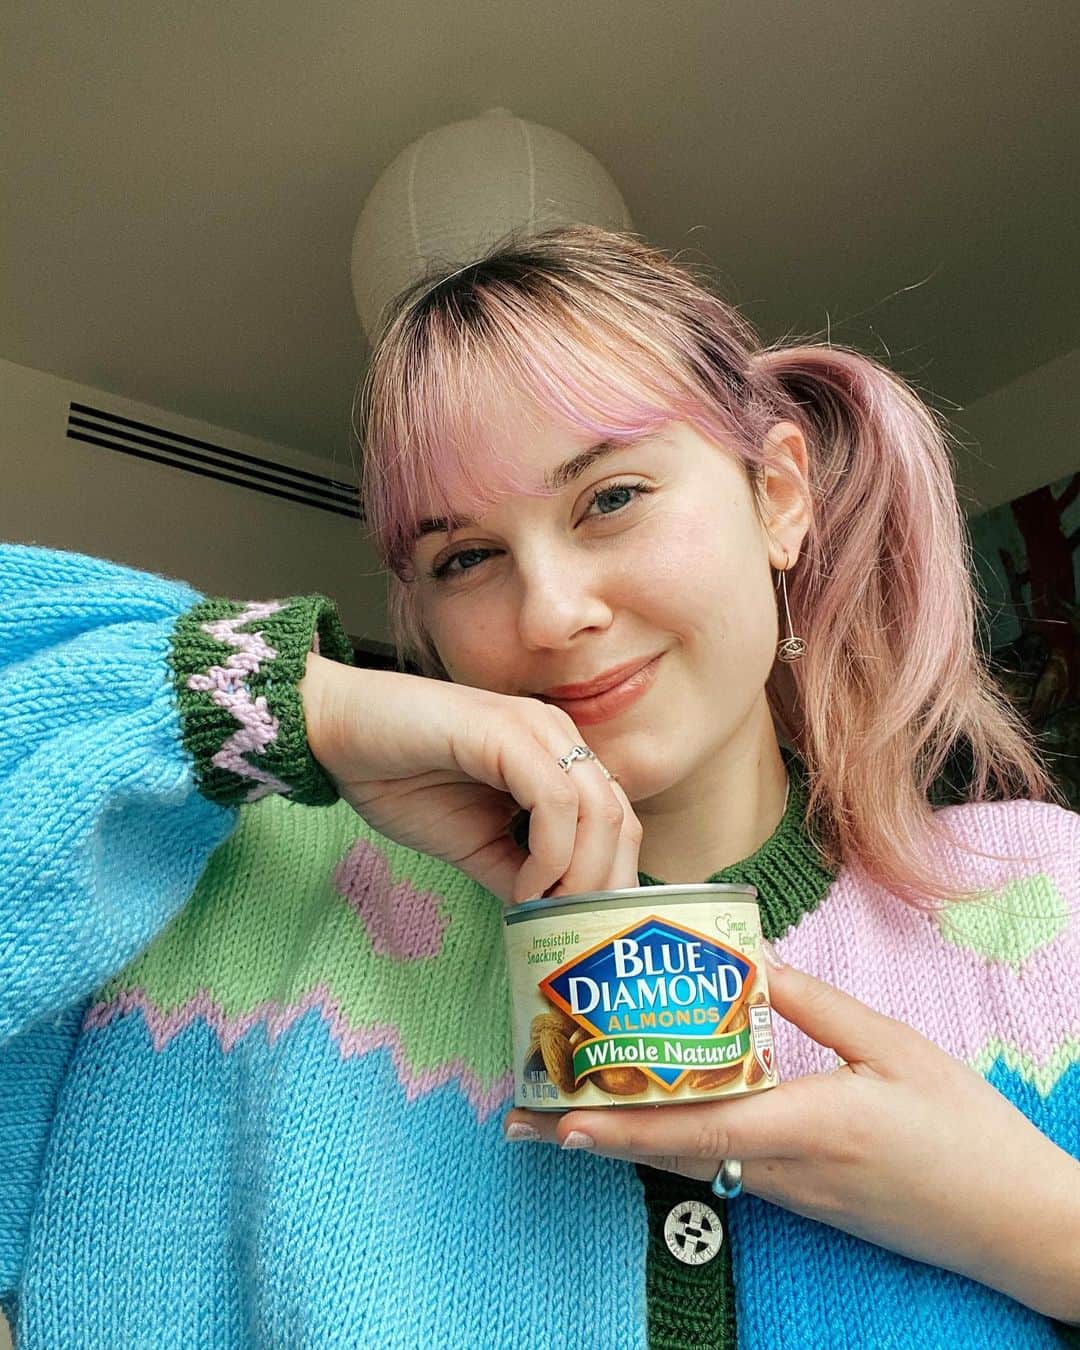 Arden Roseのインスタグラム：「Blue Diamond Whole Natural Almonds are my jam. I’ve been munching on these bad boys since I was a kid and I’m VERY GLAD I HAVE, considering they contain vitamin E, biotin, and magnesium, which help promote healthy hair, skin, nails, AND help with restfulness. What more could you want?? Now I can feel beauty-full! #FeelBeautyFull #WholeNaturalAlmonds @bluediamond」